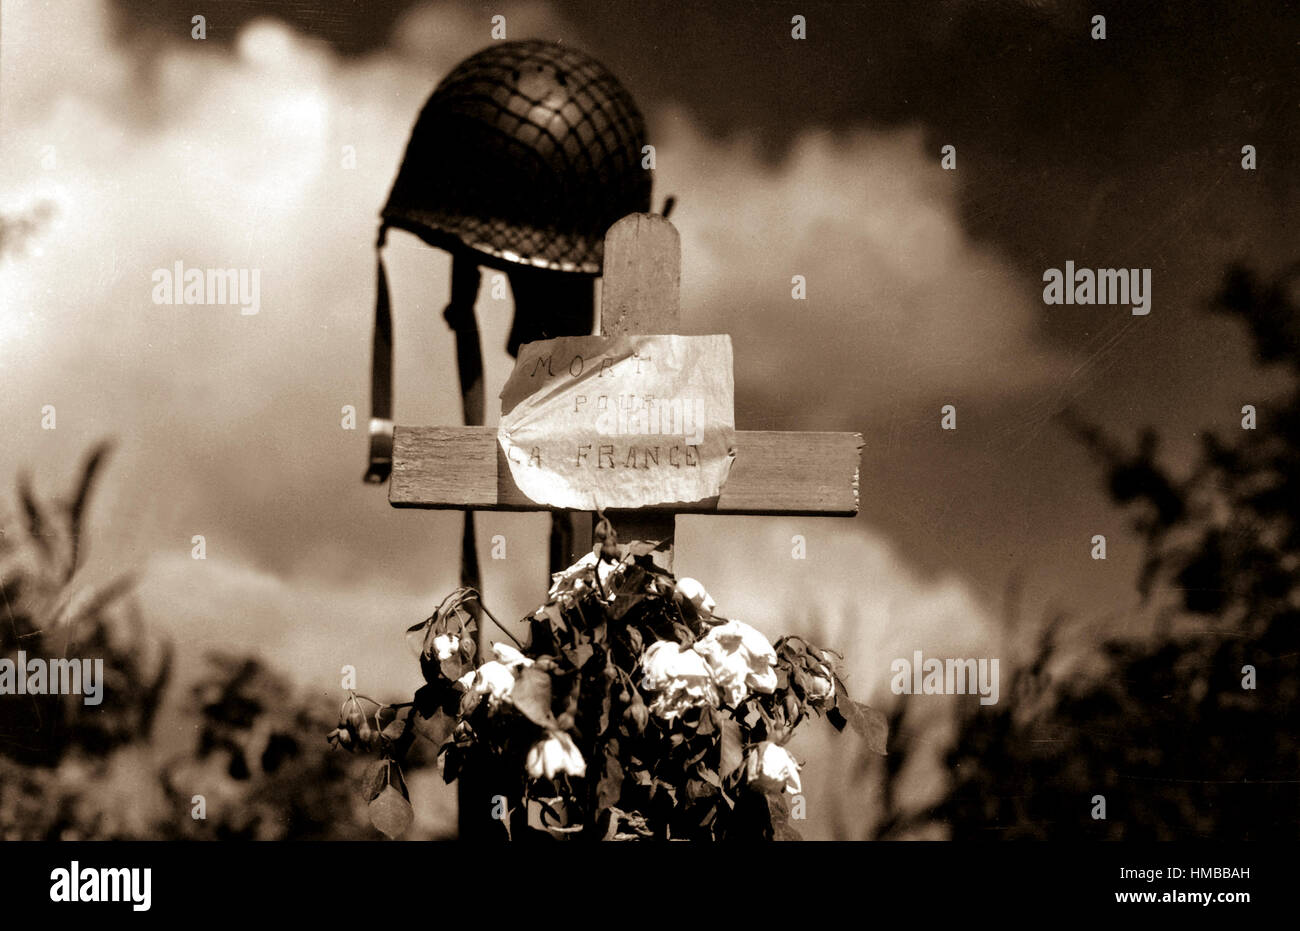 French civilians erected this silent tribute to an American soldier who has fallen in the crusade to liberate France from Nazi domination.  Carentan, France.  June 17, 1944. Himes.  (Army) NARA FILE #:  111-SC-190597 WAR & CONFLICT BOOK #:  1349 Stock Photo